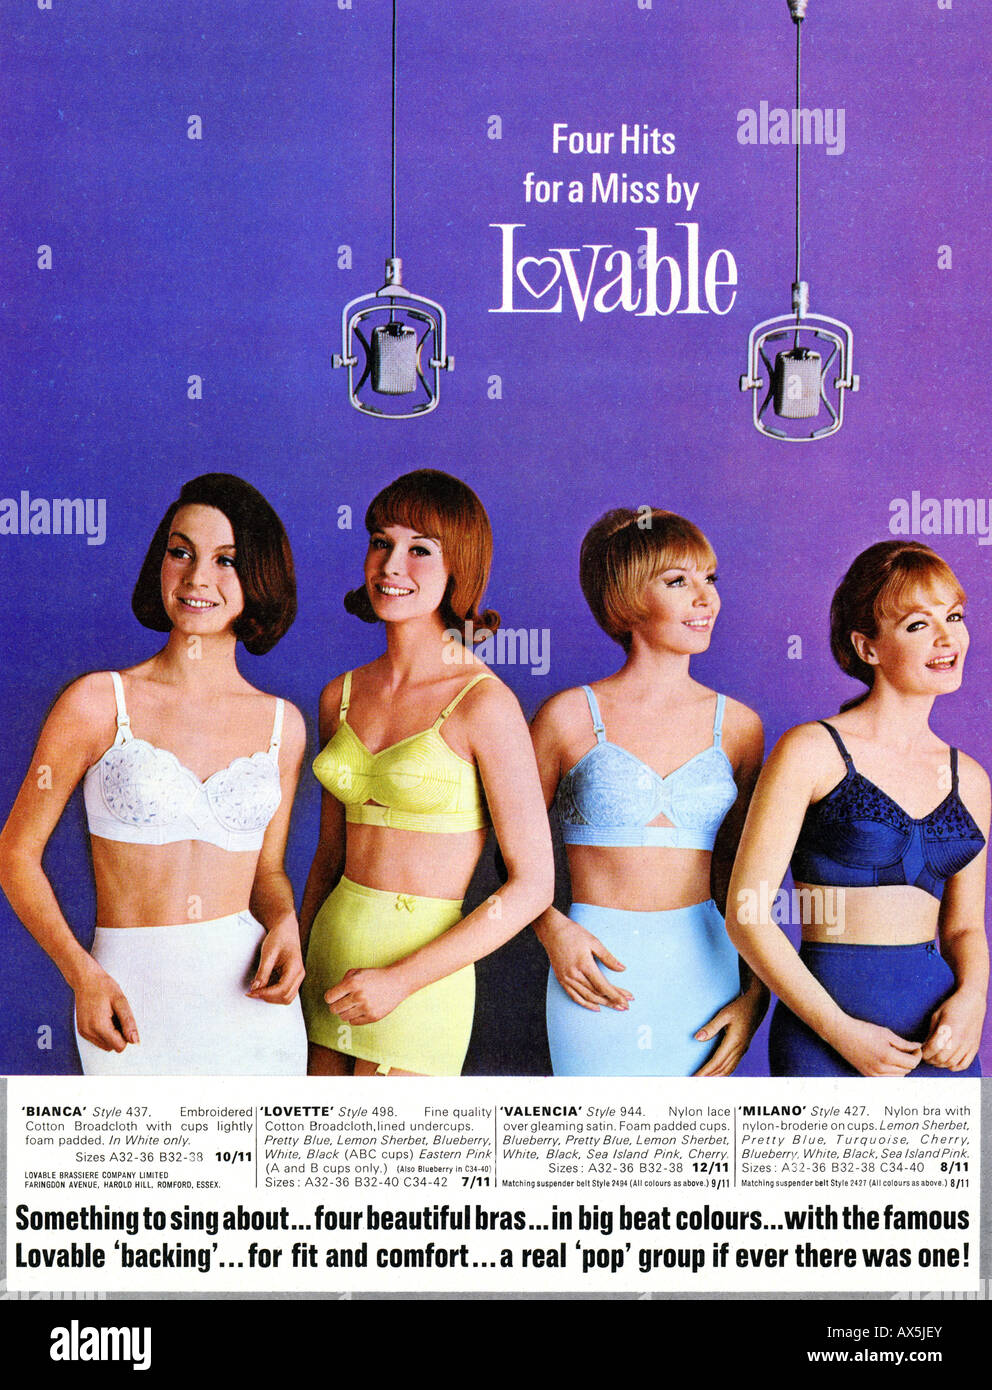 https://c8.alamy.com/comp/AX5JEY/1960s-sixties-advertisement-for-bras-brassieres-by-lovable-1965-for-AX5JEY.jpg